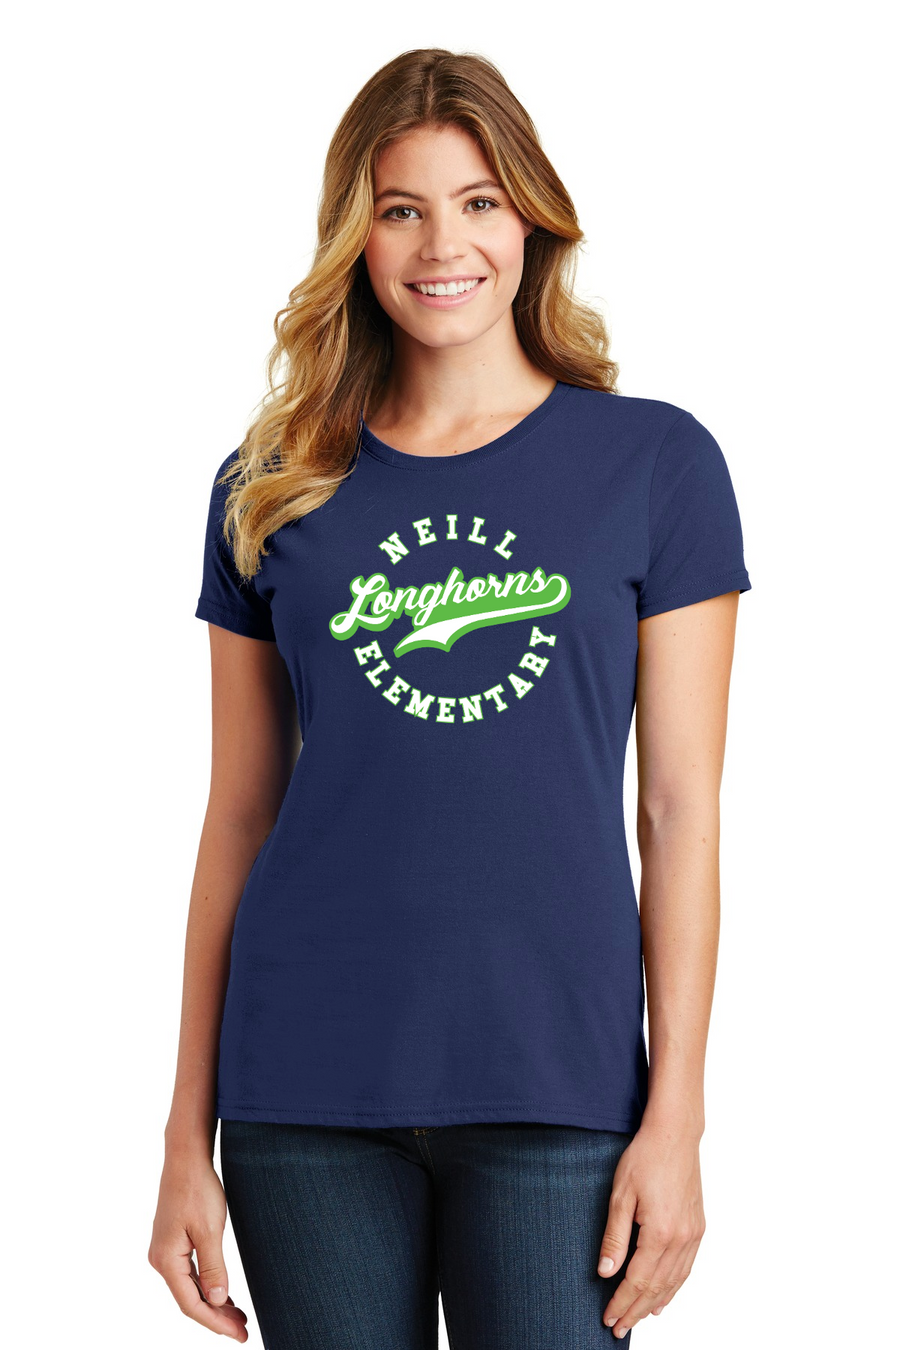 Neill Elementary Spirit Wear 2023/24 On-Demand-Port and Co Ladies Favorite Shirt Lime Logo